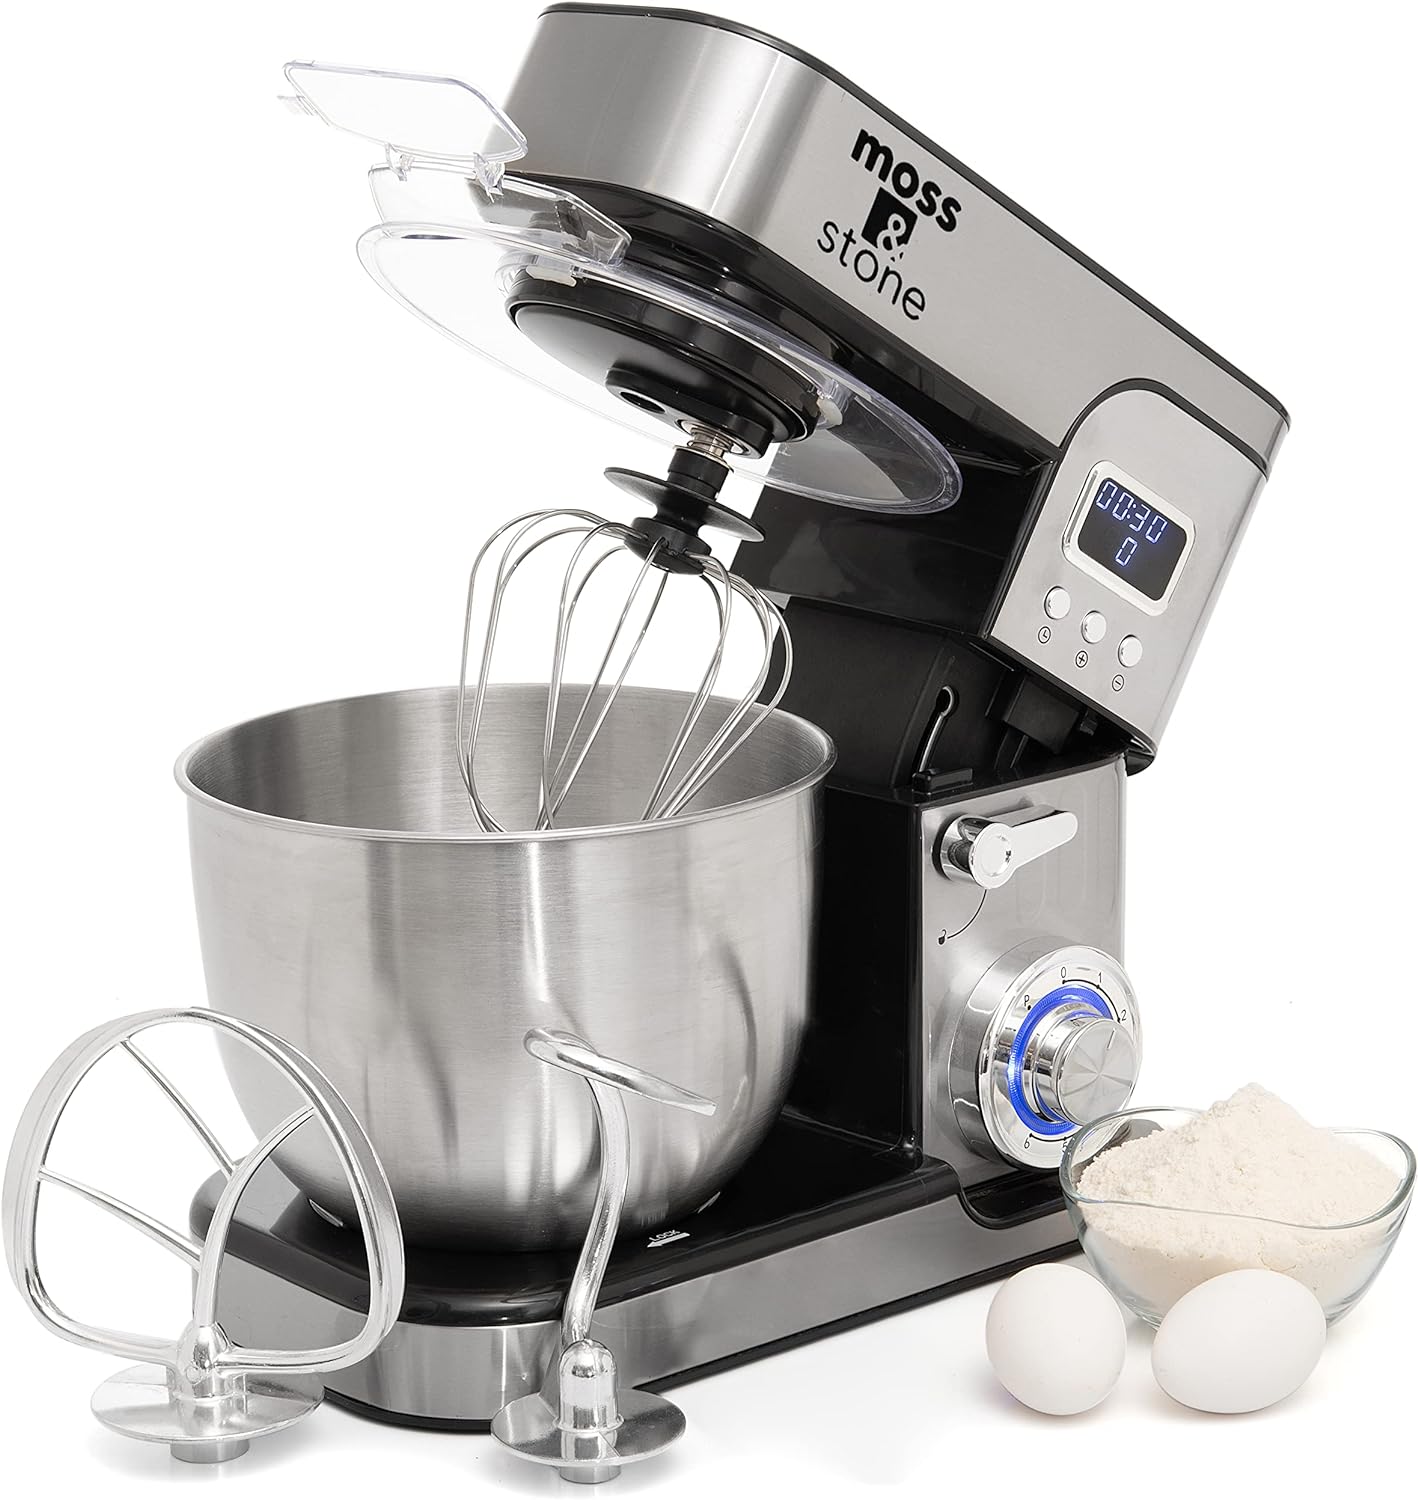 Moss & Stone Stand Mixer With Lcd Display, 6 Speed Electric Mixer With 5.5 Quart Stainless Steel Mixing Bowl, Kitchen Mixer With Dough Hook, Egg Whisk, Beater & Baking Spatula, Food Mixer With Timer